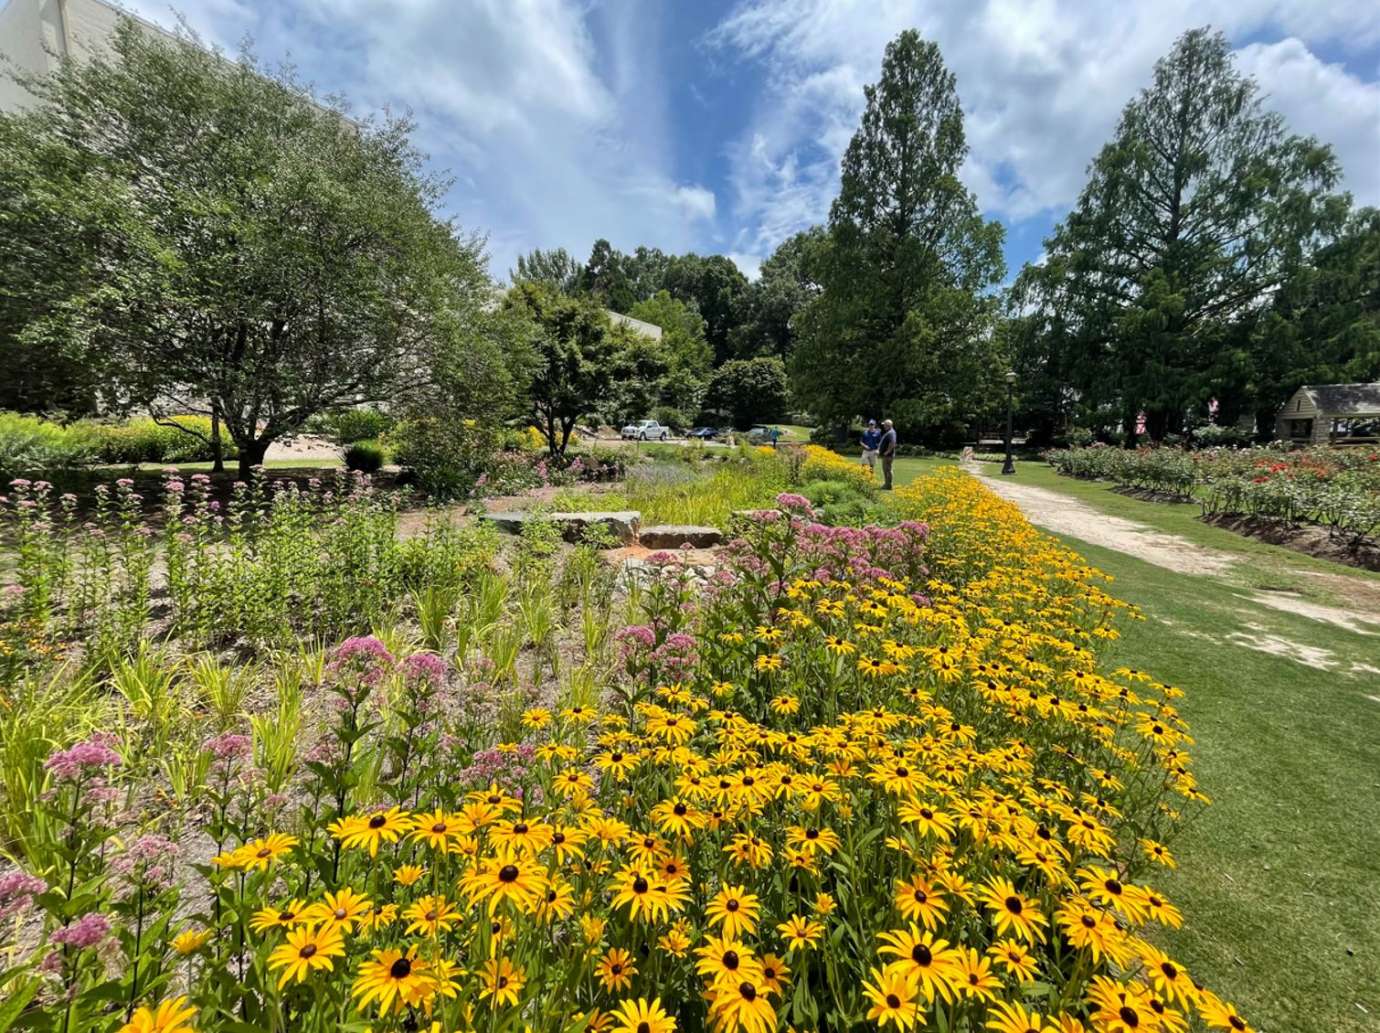 Flowers and stormwater infrastructure at Raleigh Rose Garden